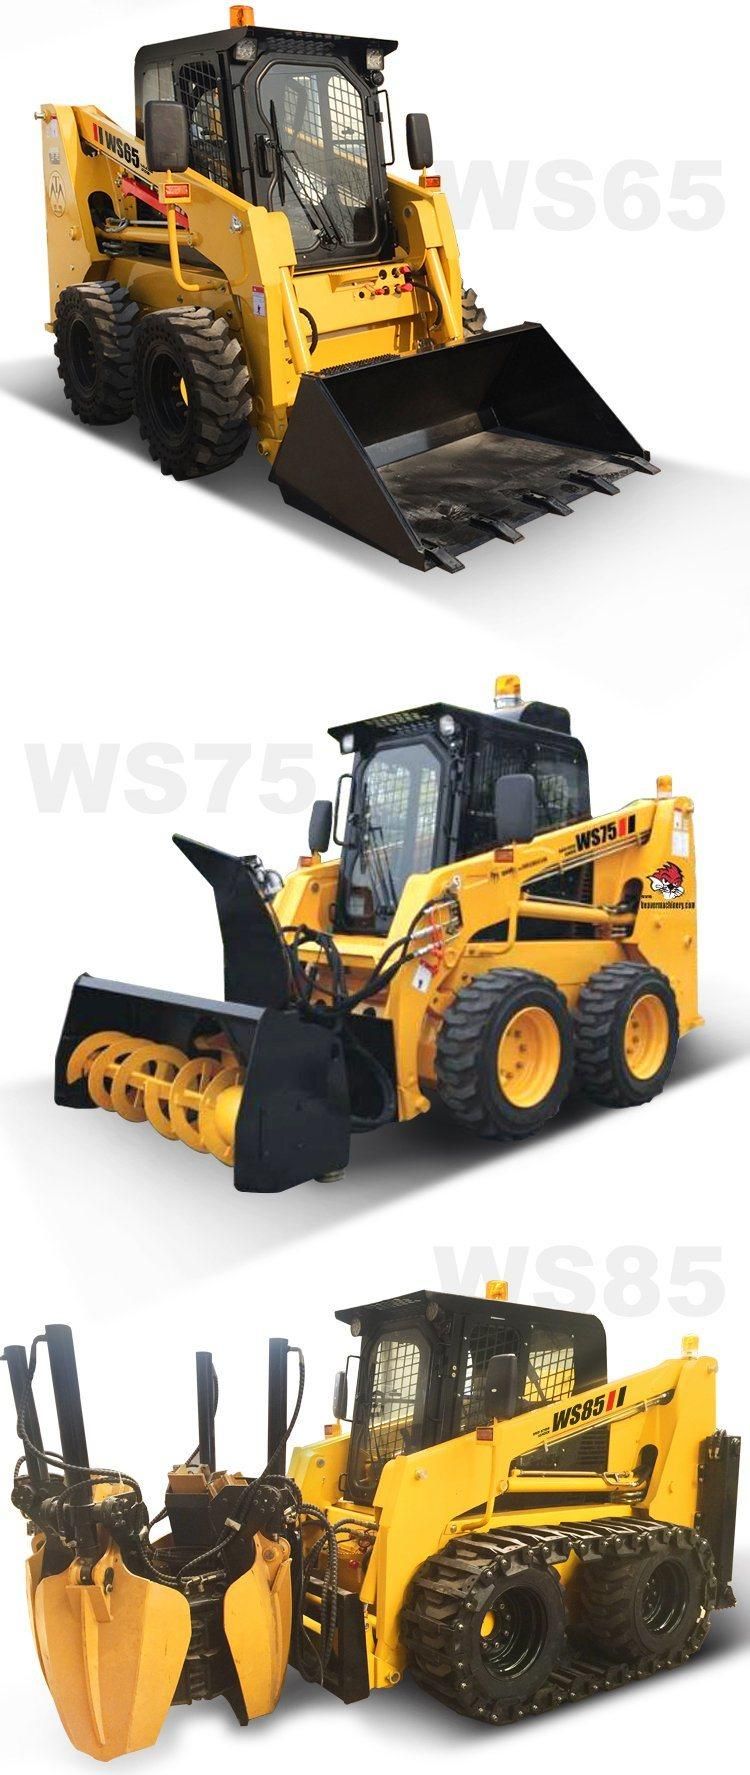 The Hot Selling Skid Steer Loader Ws50 with Bucket Is for Sale